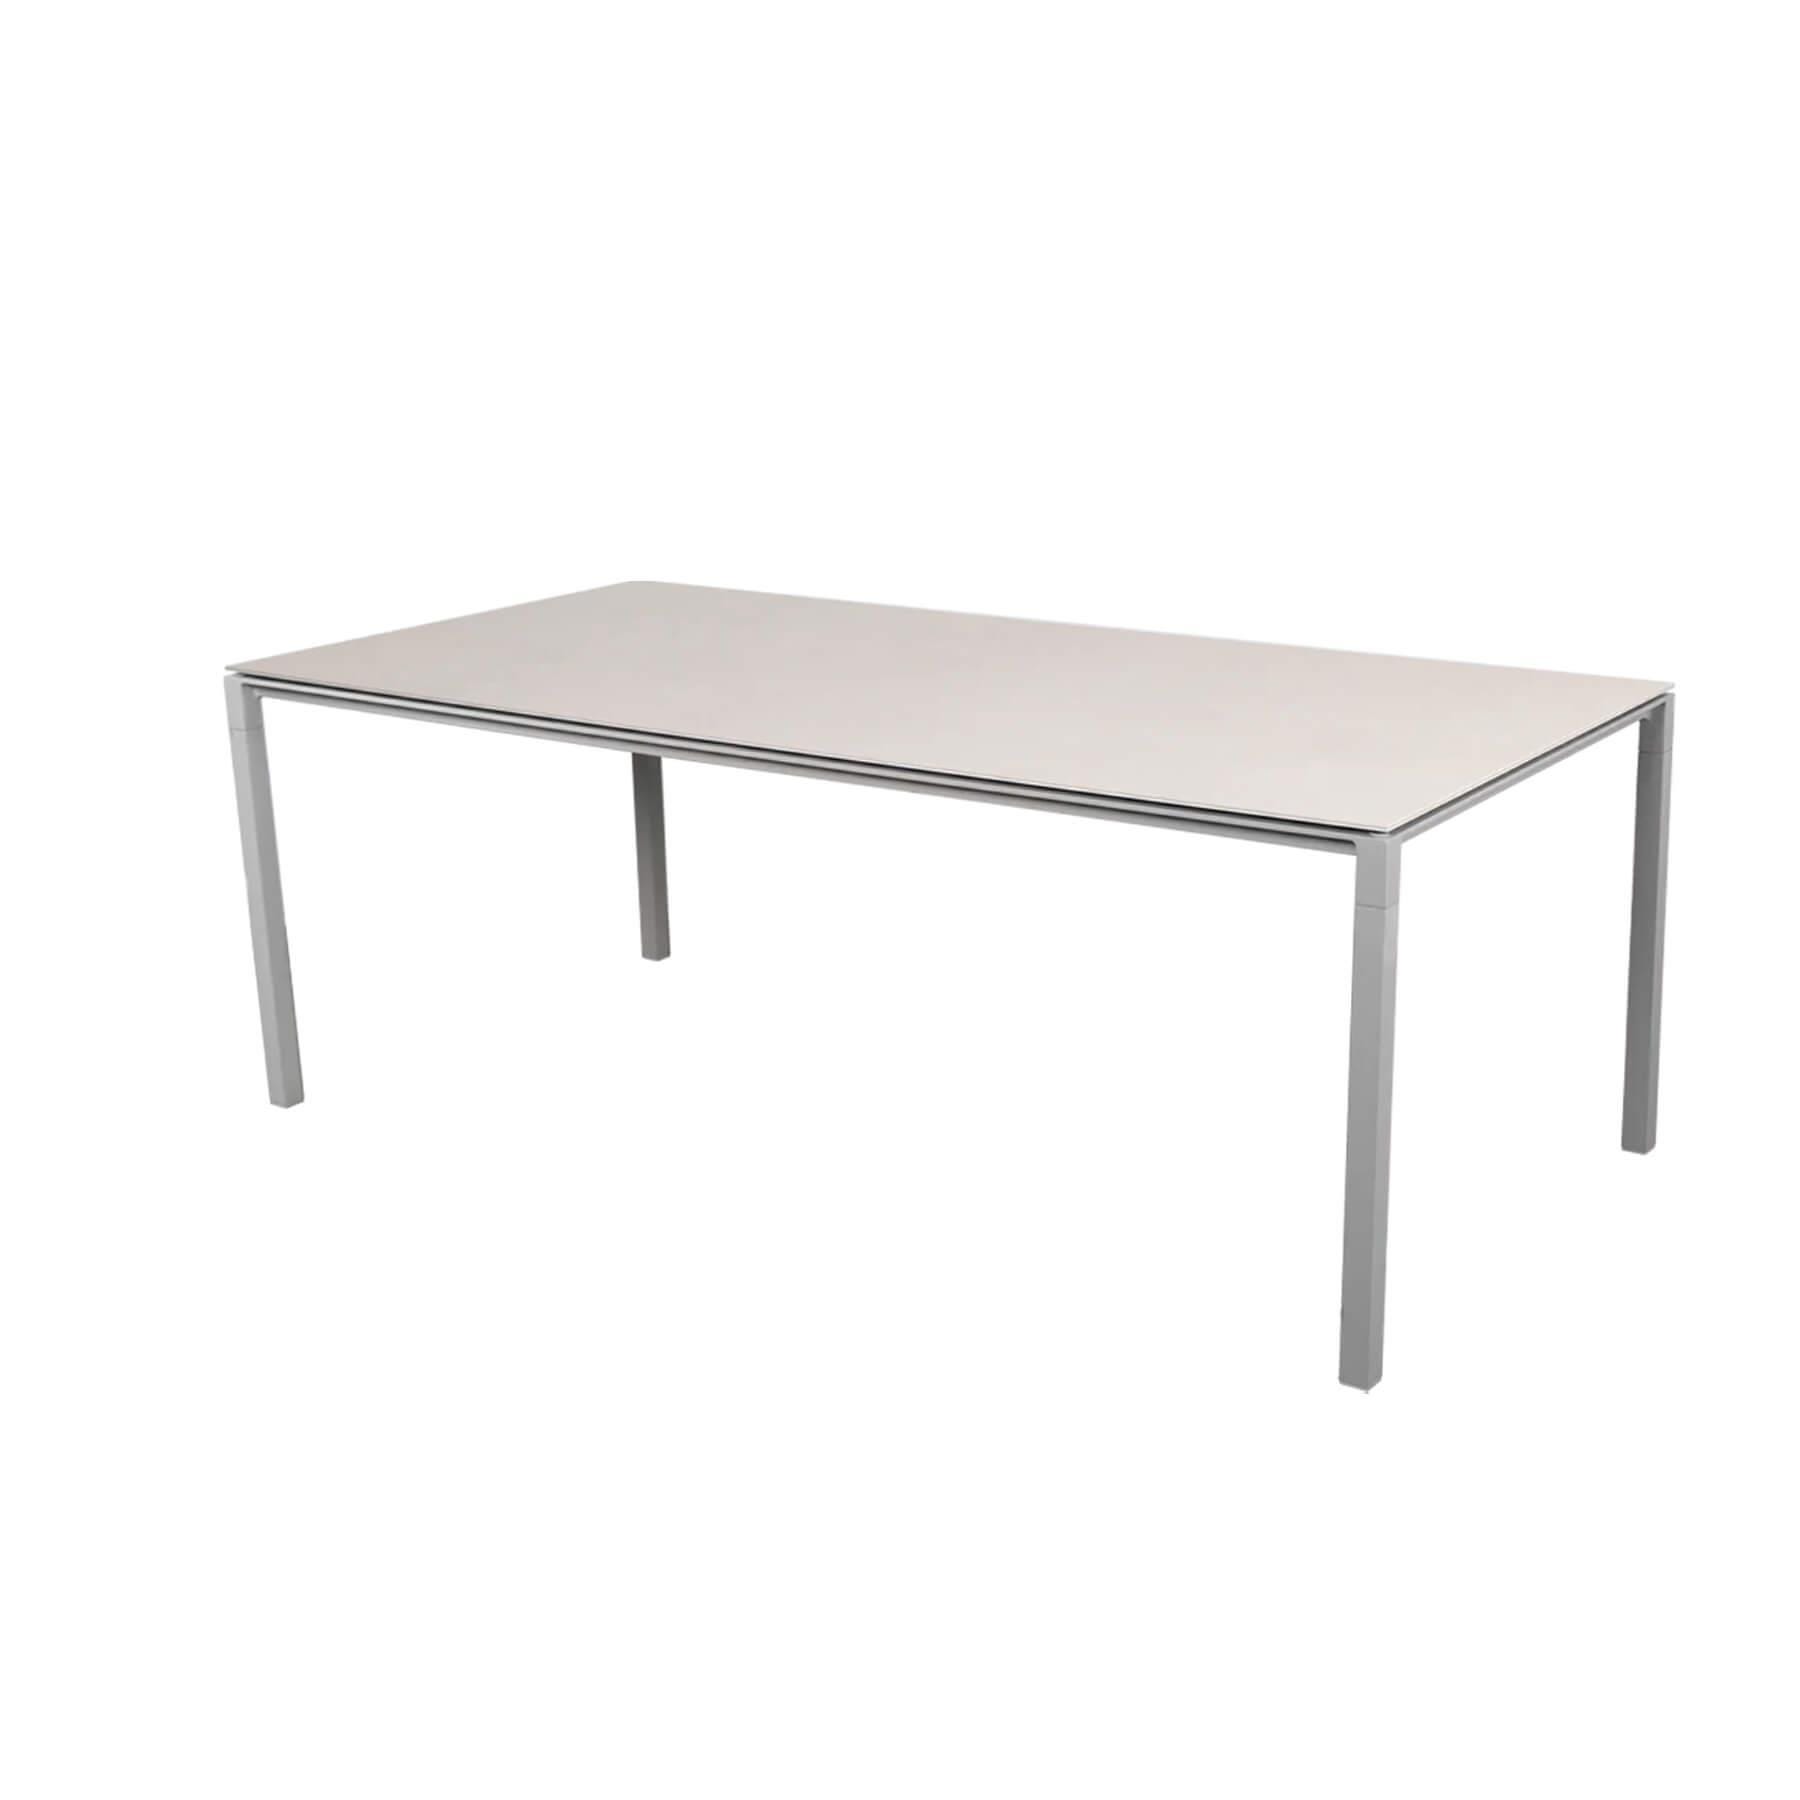 Caneline Pure Outdoor Dining Table Large Ceramic Toscana Sand Top Light Grey Legs